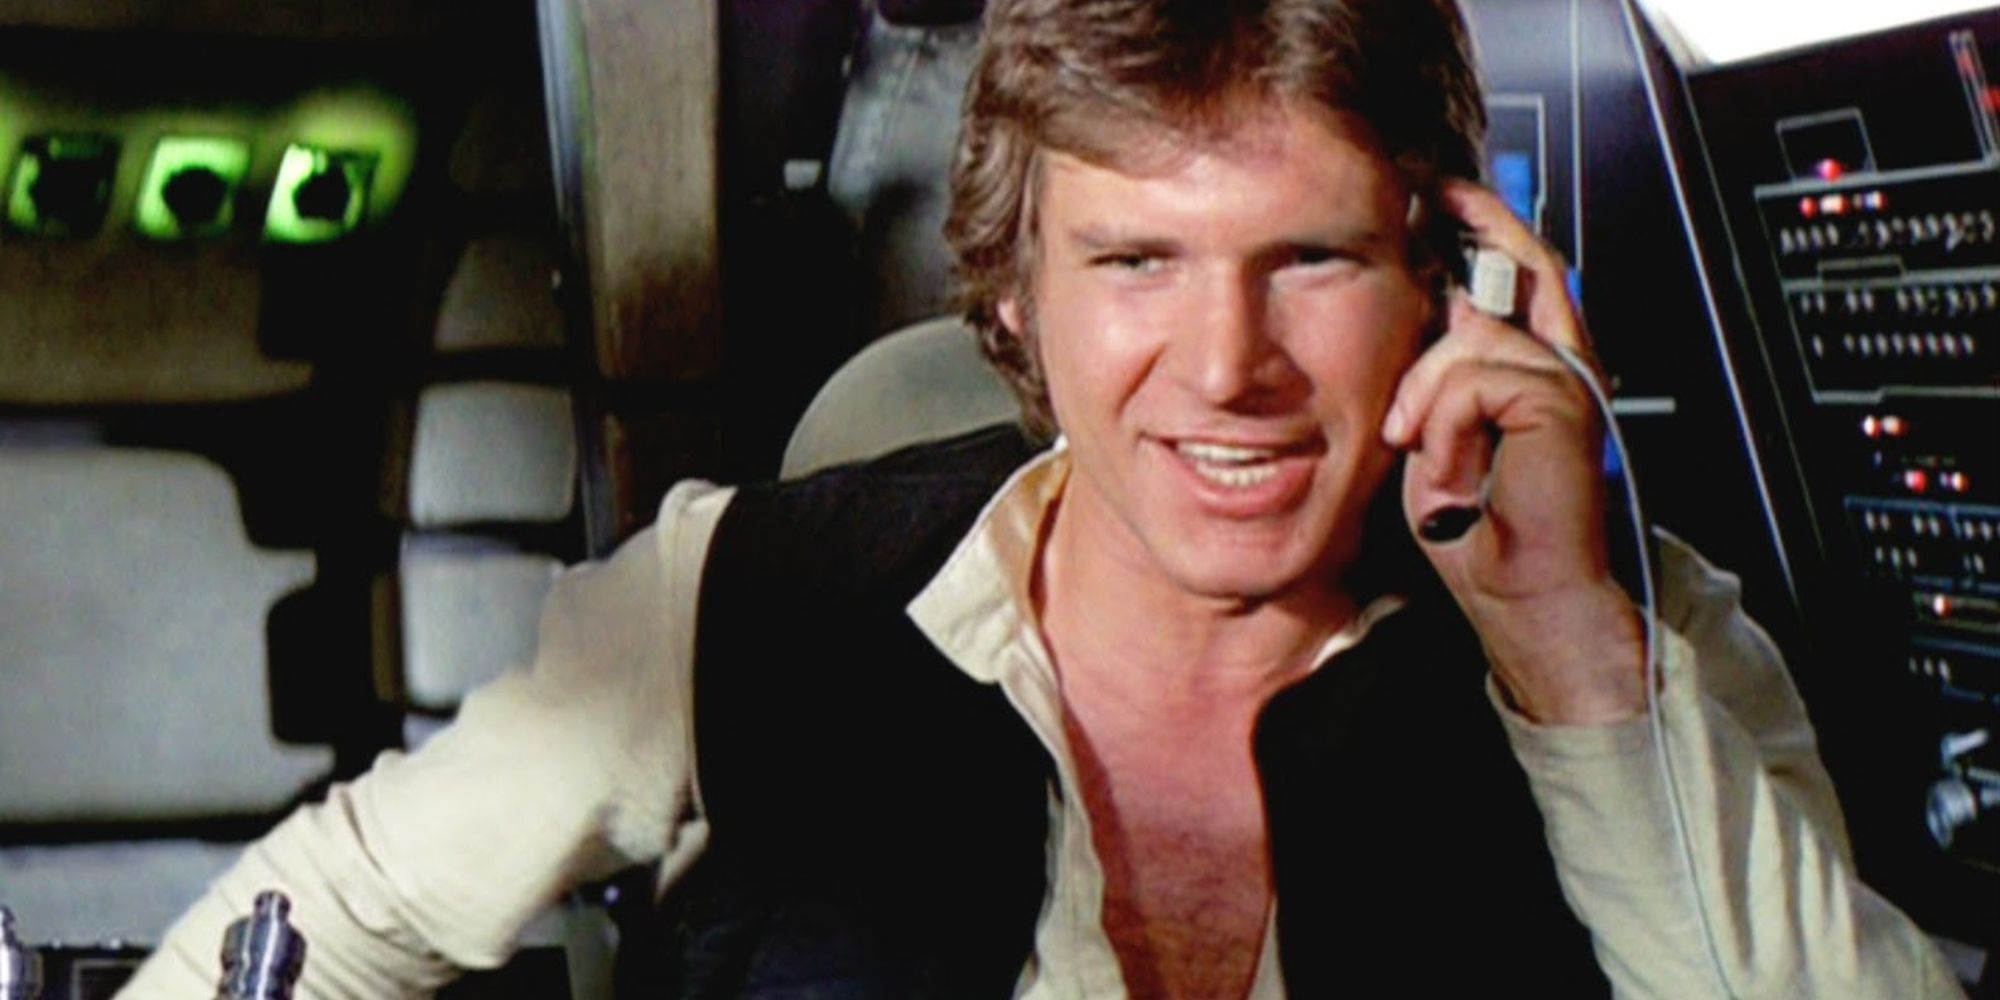 Han Solo sits in the cockpit of the Millennium Falcon, talking to Luke Skywalker on the radio